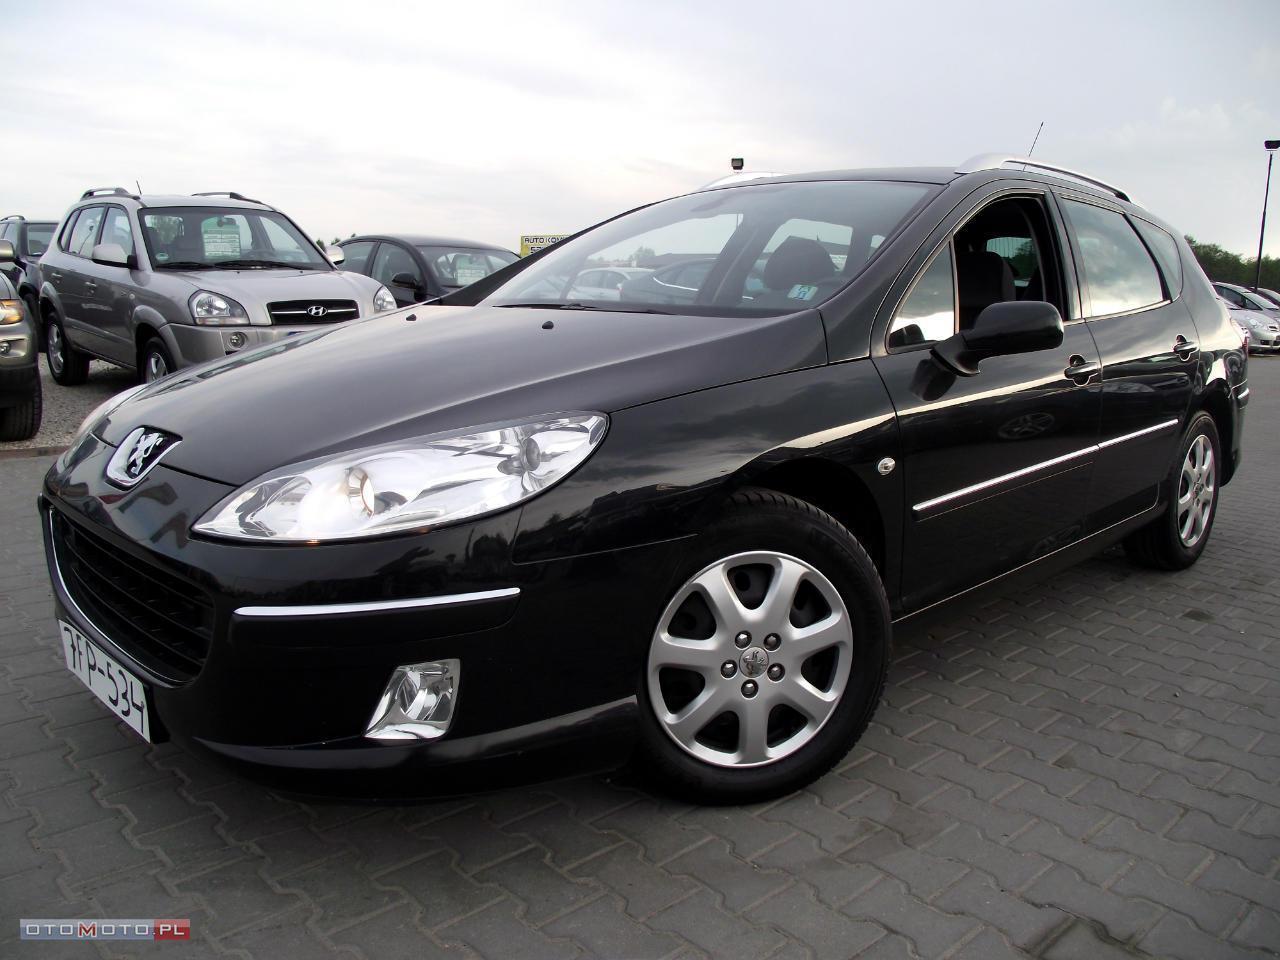 Peugeot 407 PANORAMA DACH,IDEALNY STAN